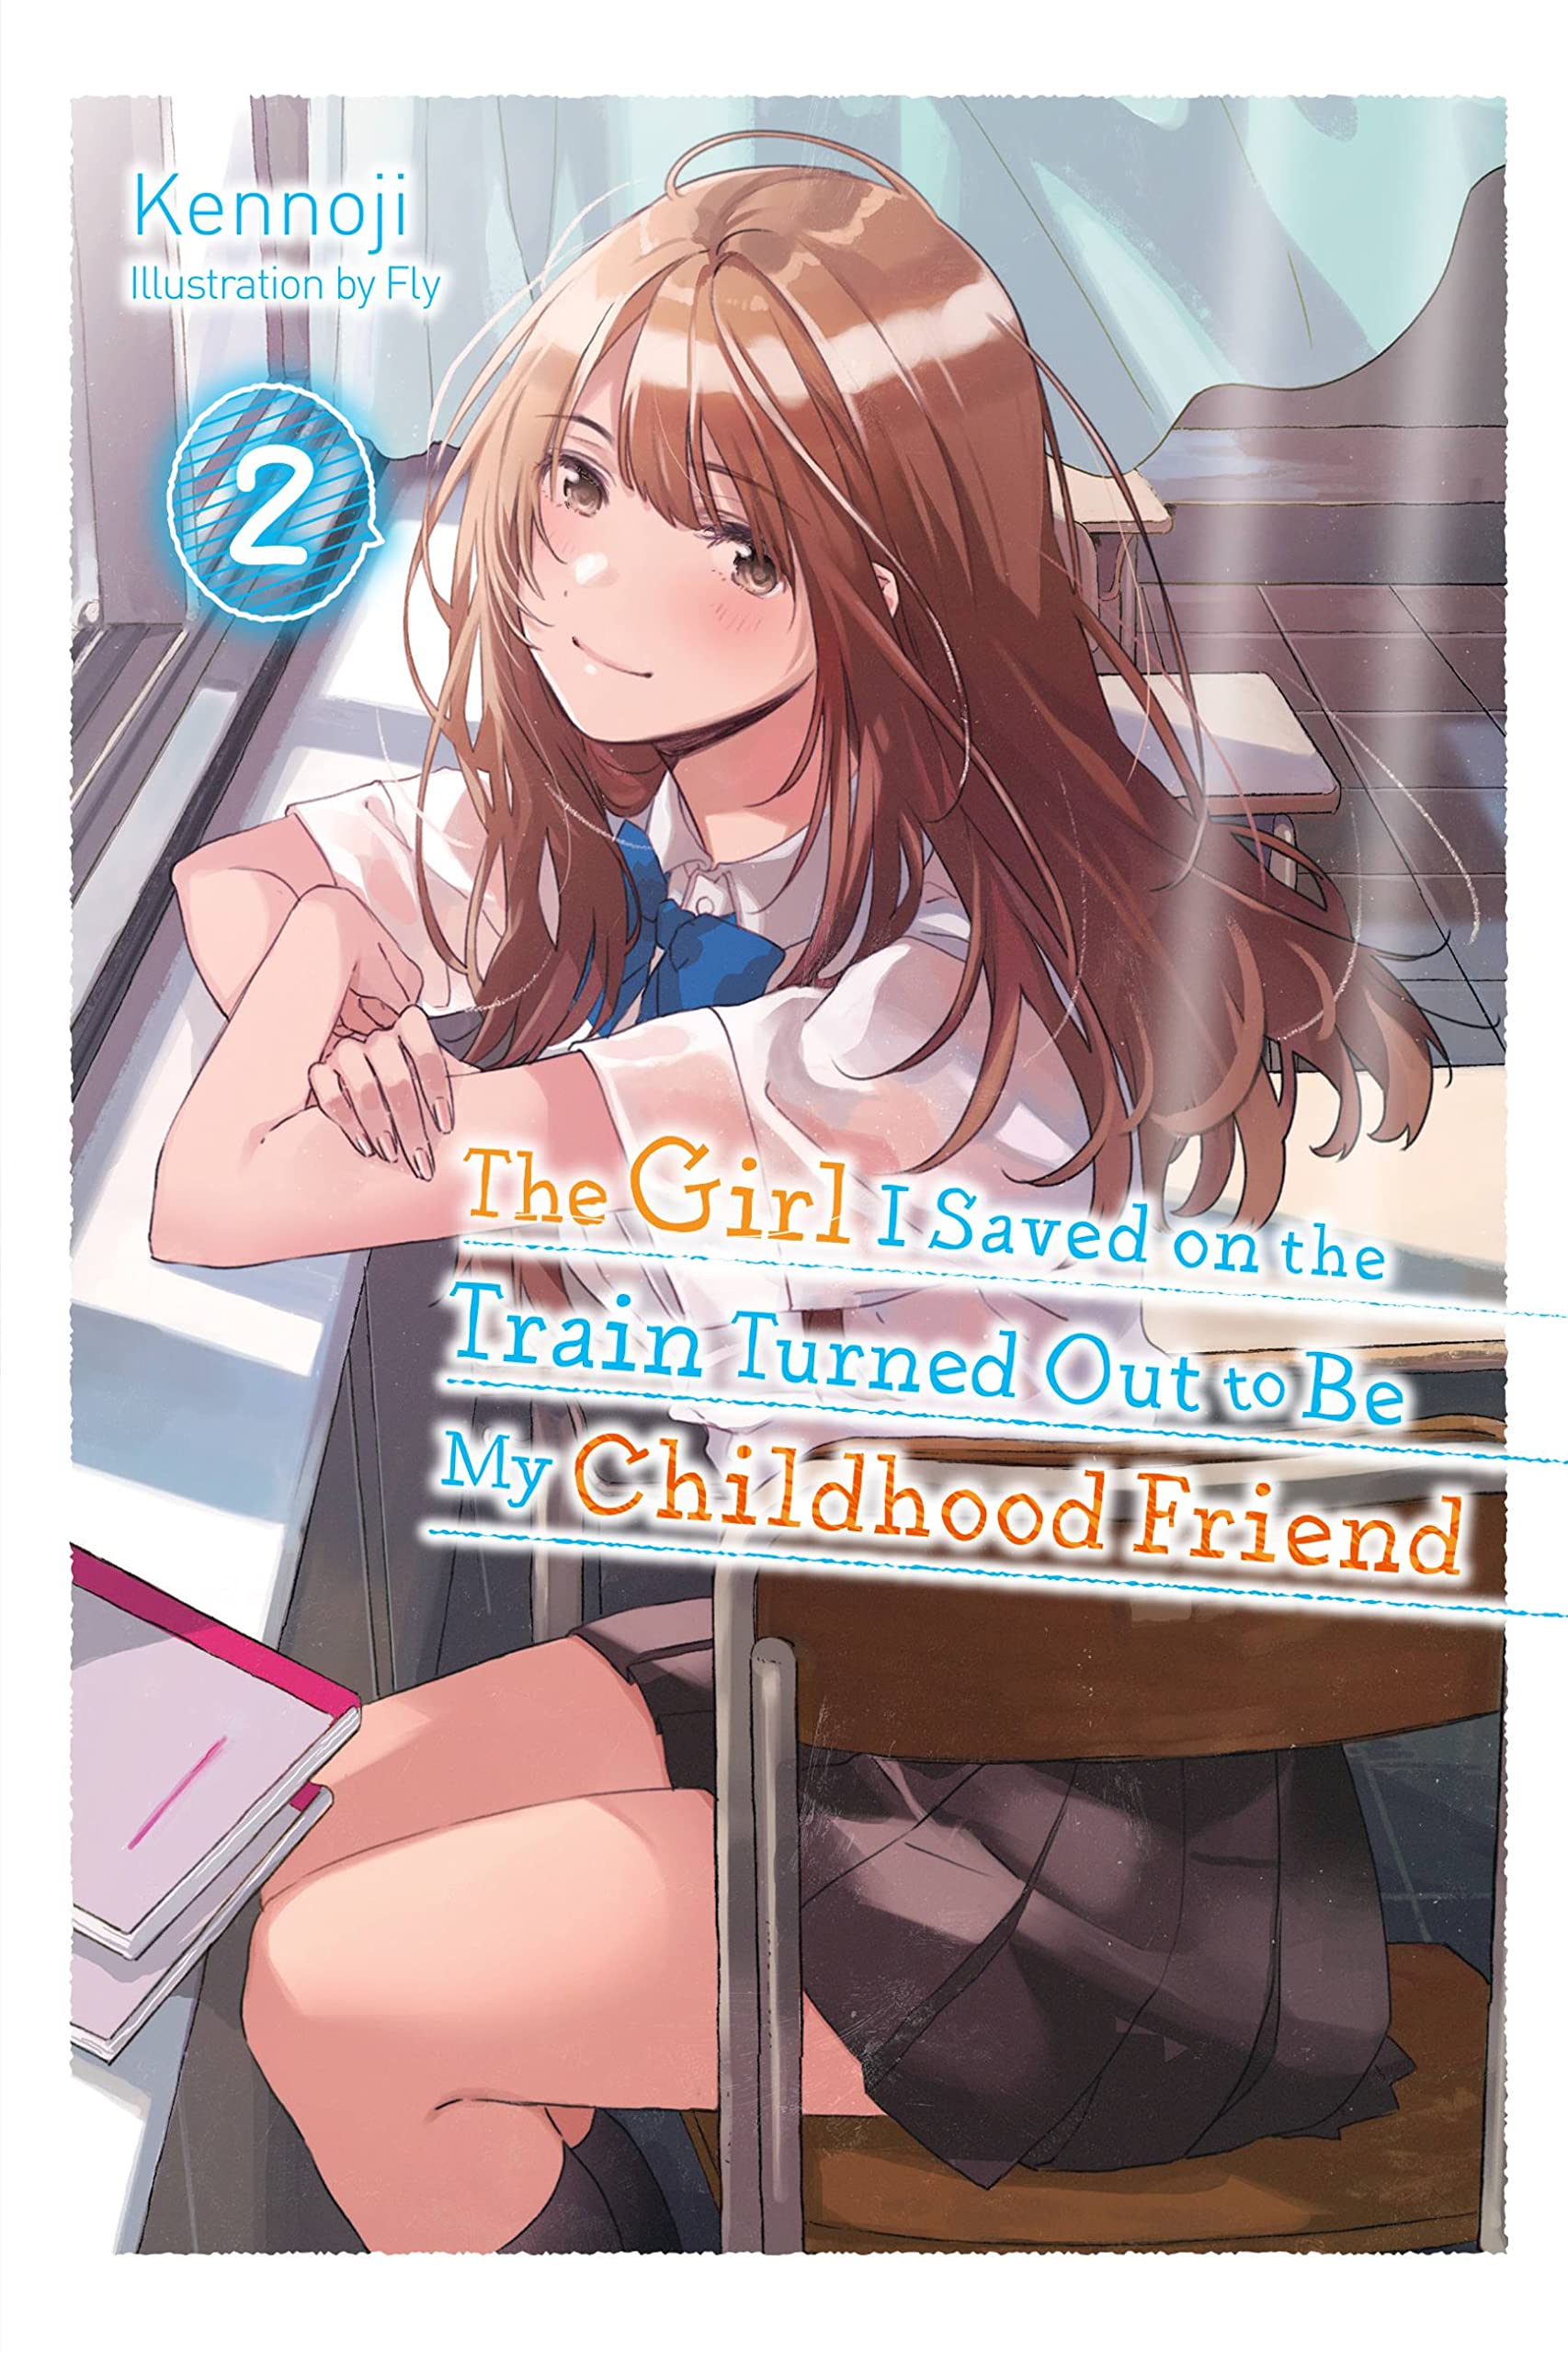 The Girl I Saved on the Train Turned Out to Be My Childhood Friend Vol. 02 (Light Novel)